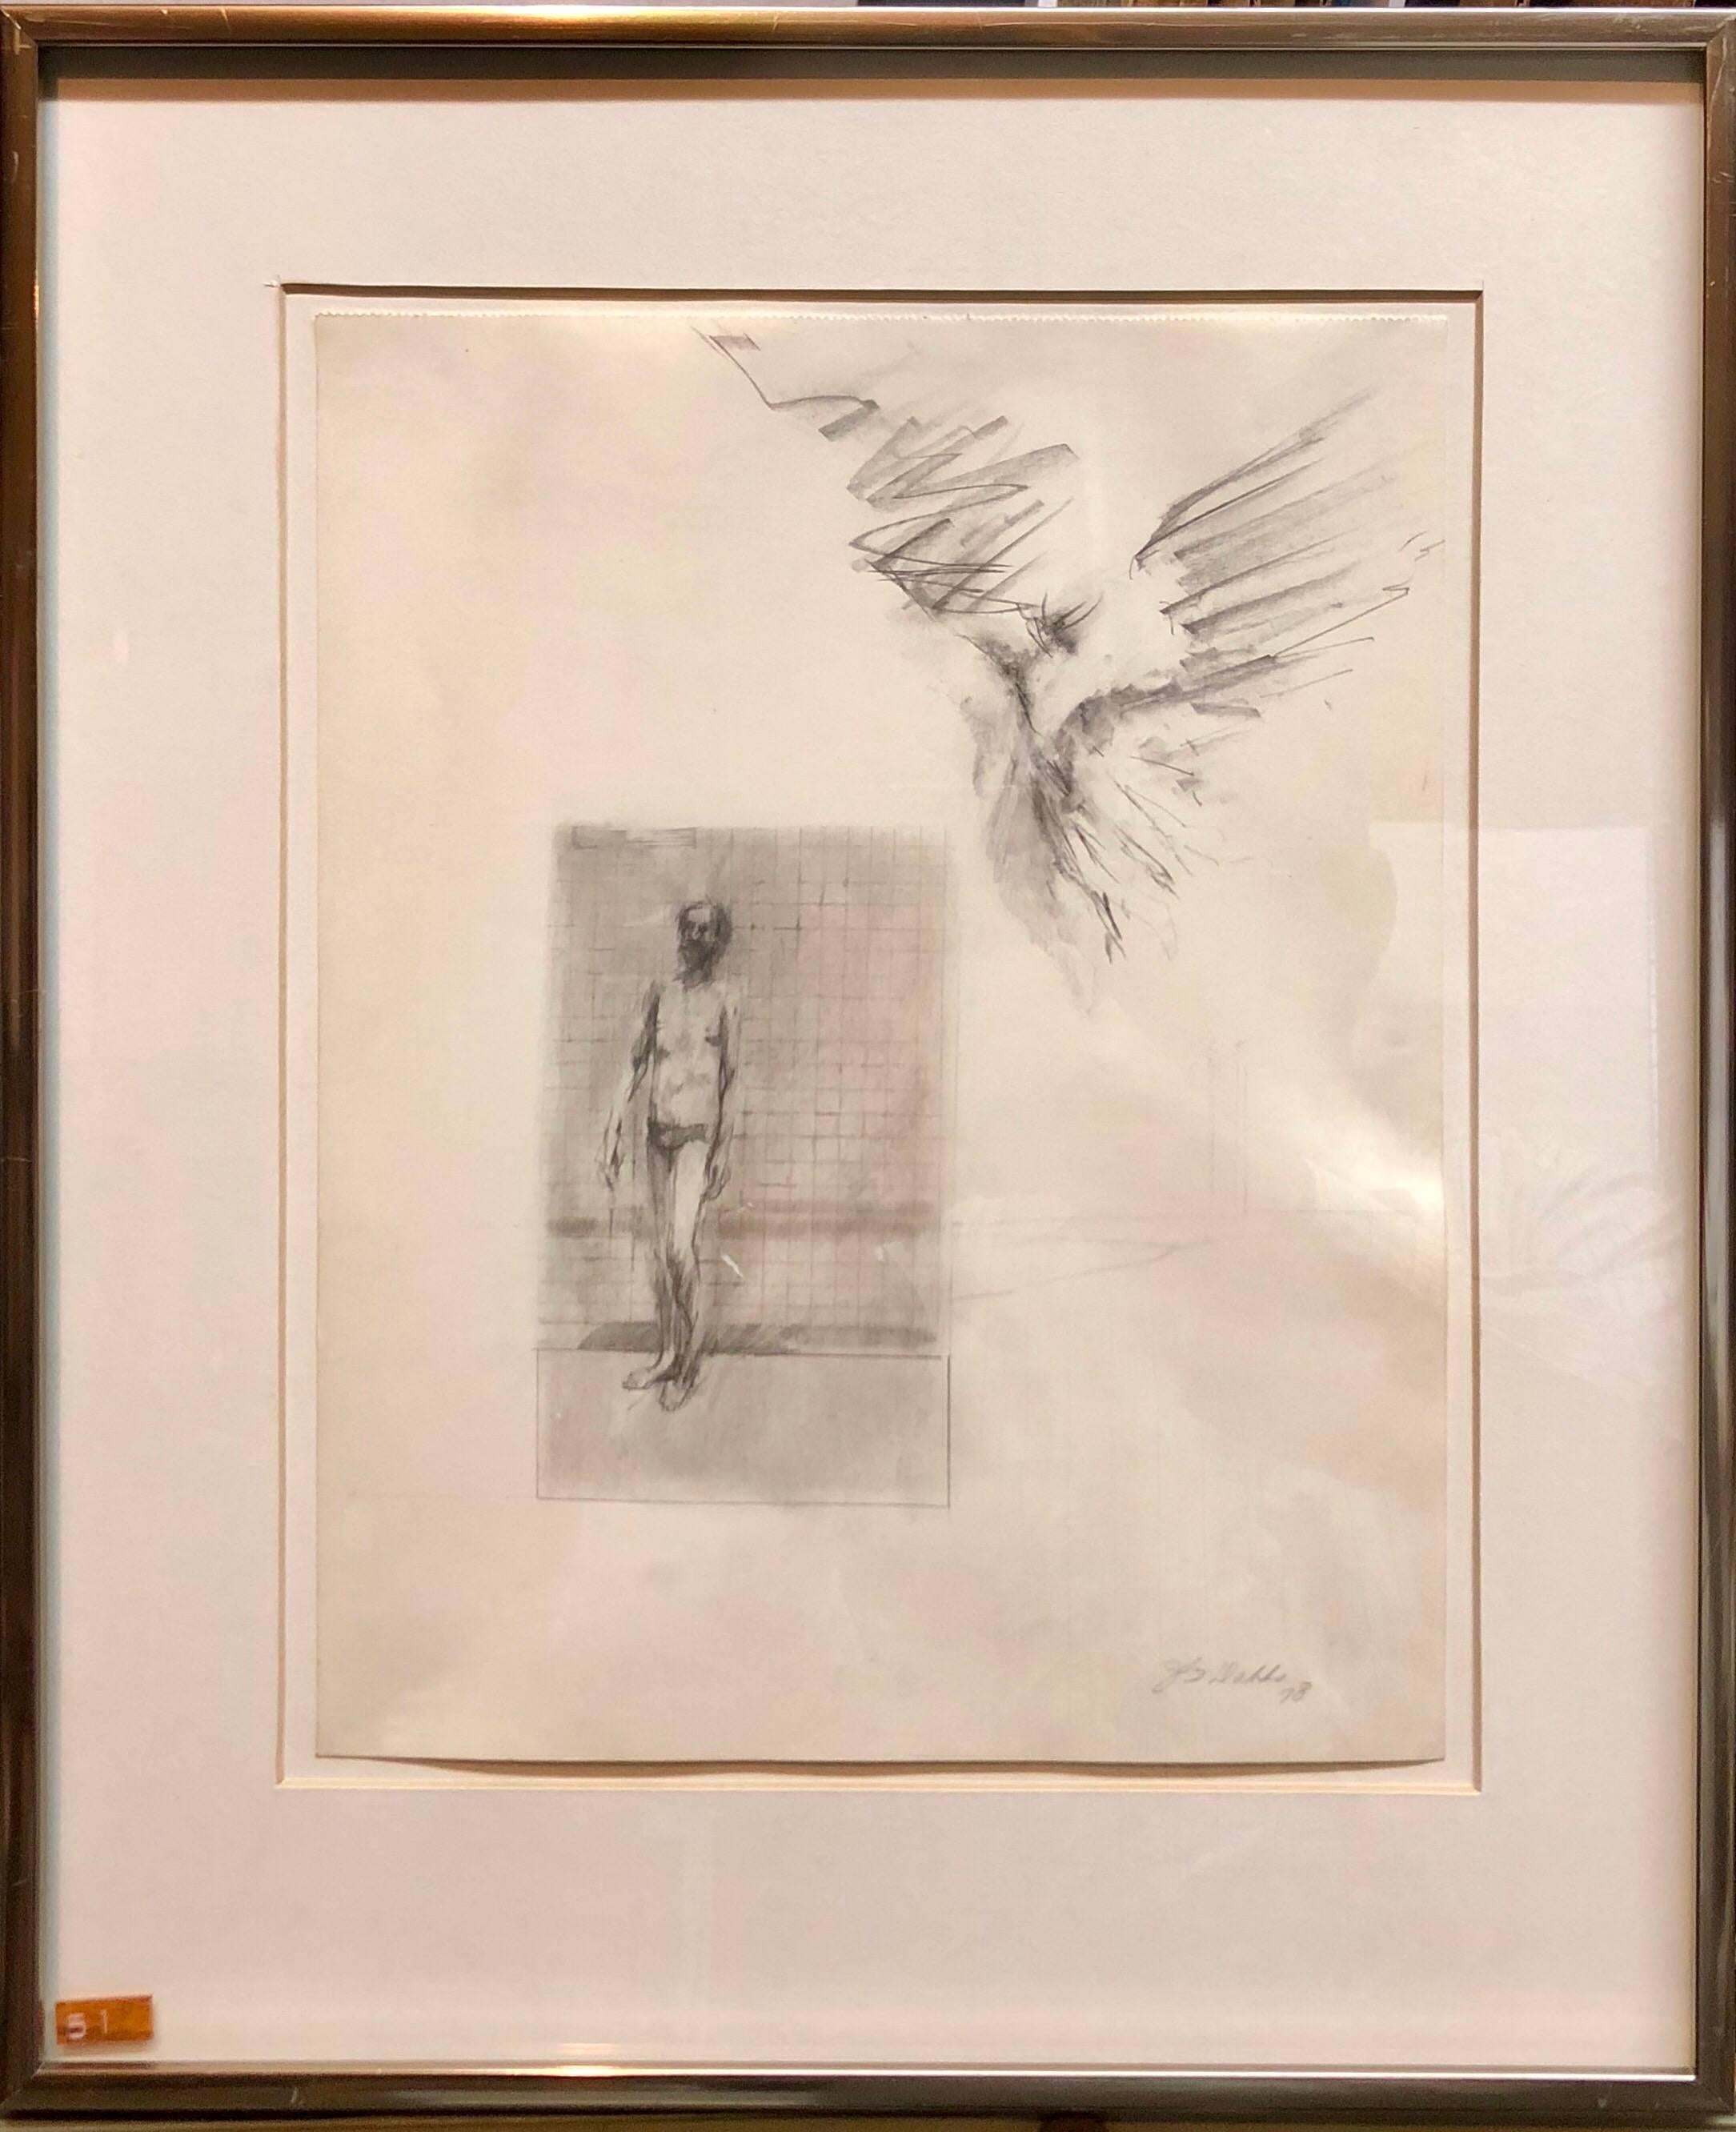 John Dobbs Figurative Art - Abstract Modernist Drawing of a Nude Man with Winged Figure, Angel